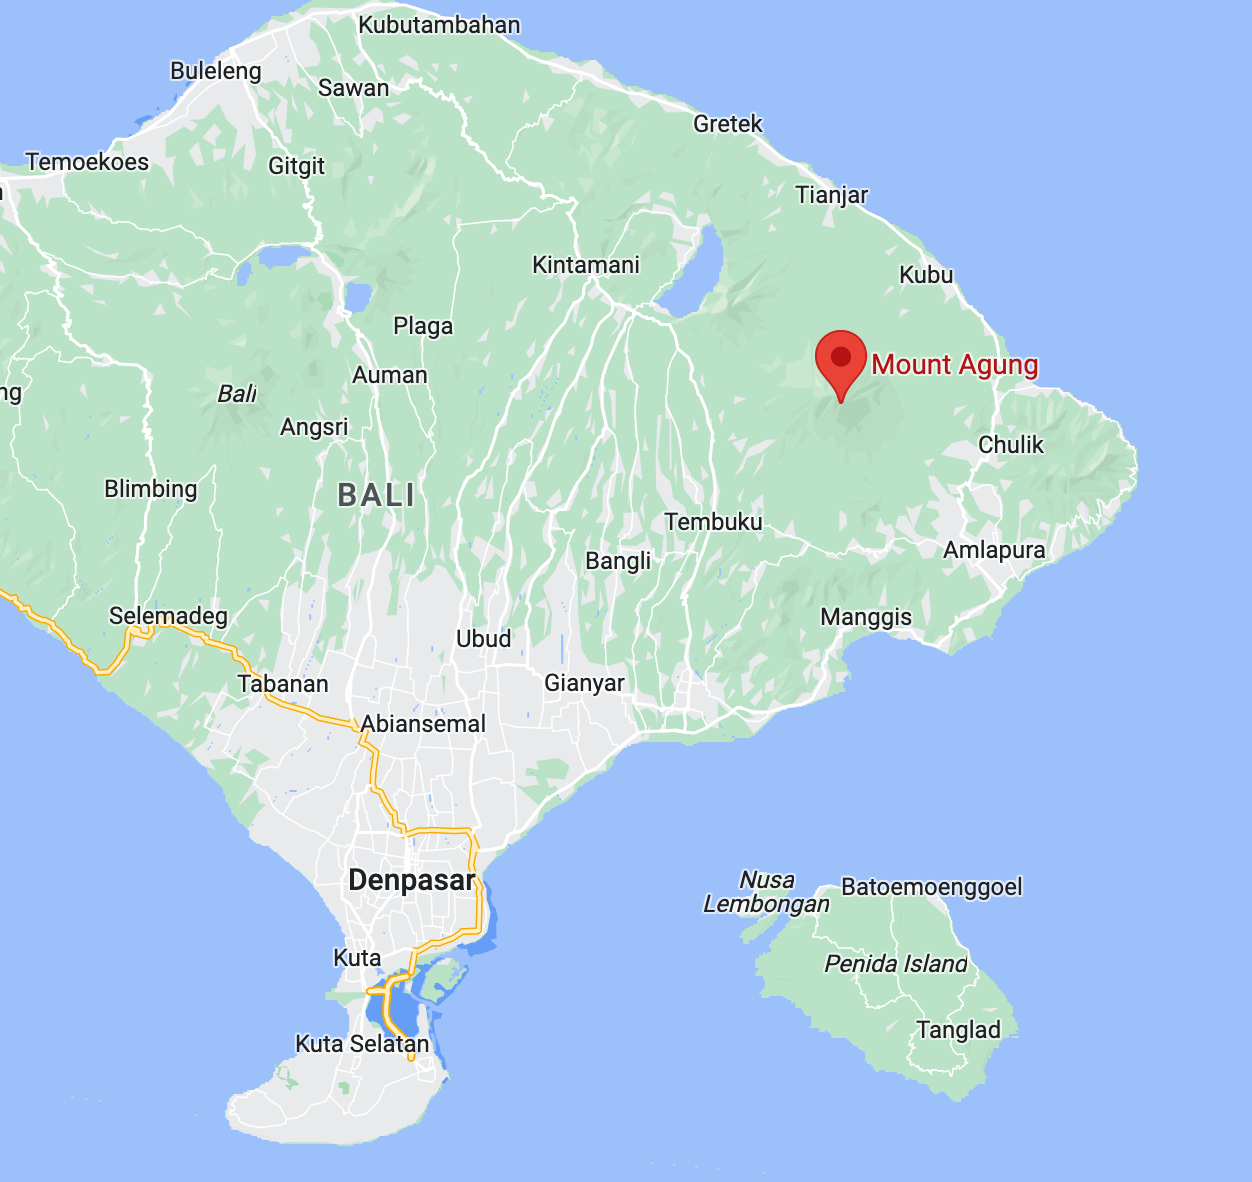 Google map highlighting Mount Agung's location in Bali